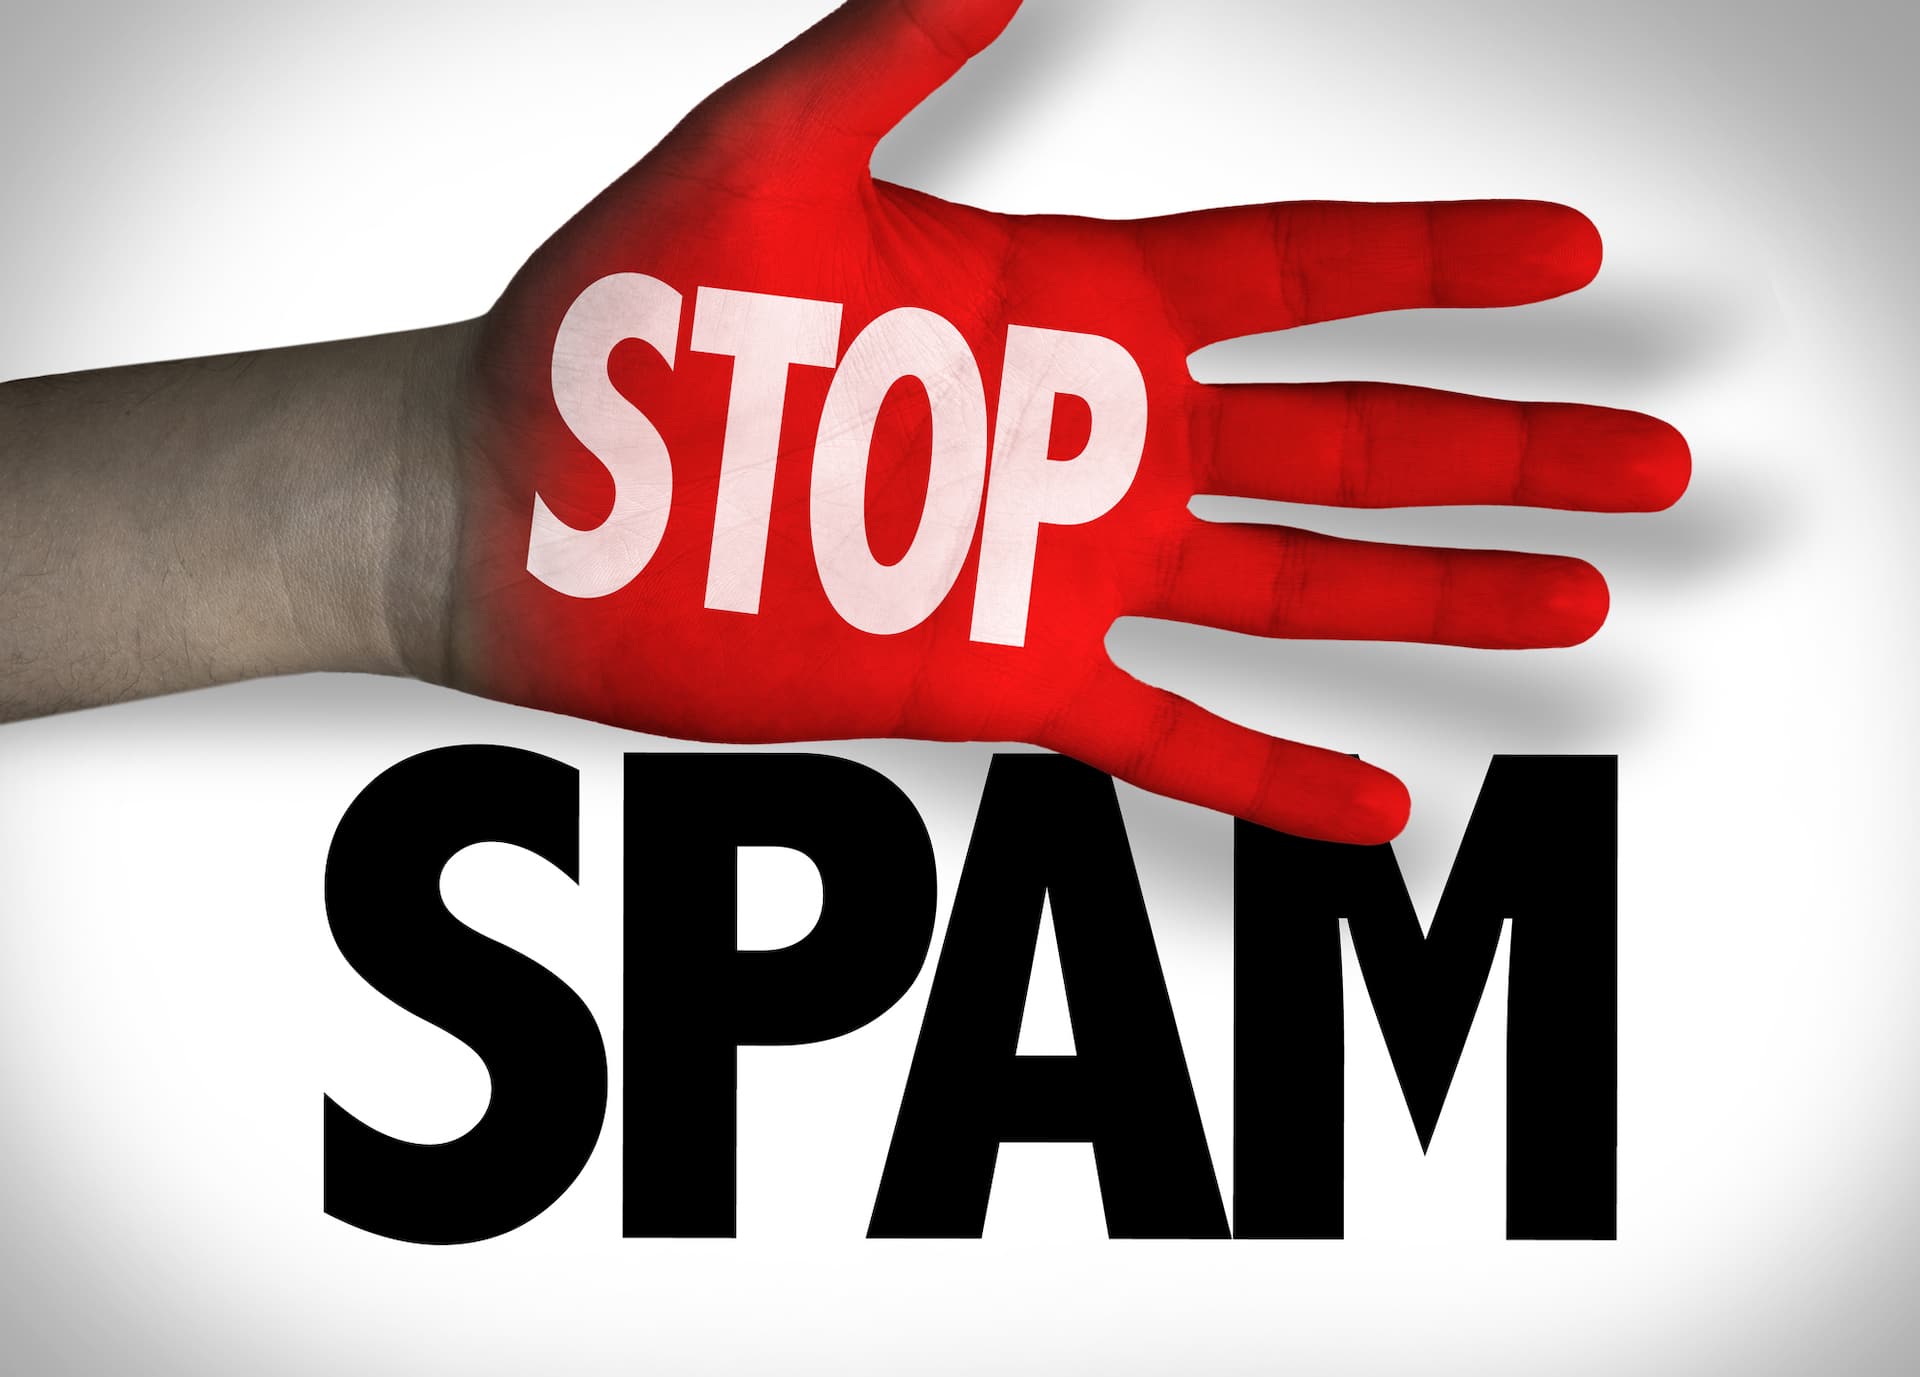 A hand displaying the word "stop spam" representing compliance with the CAN SPAM Act, U.S. anti-spam laws.